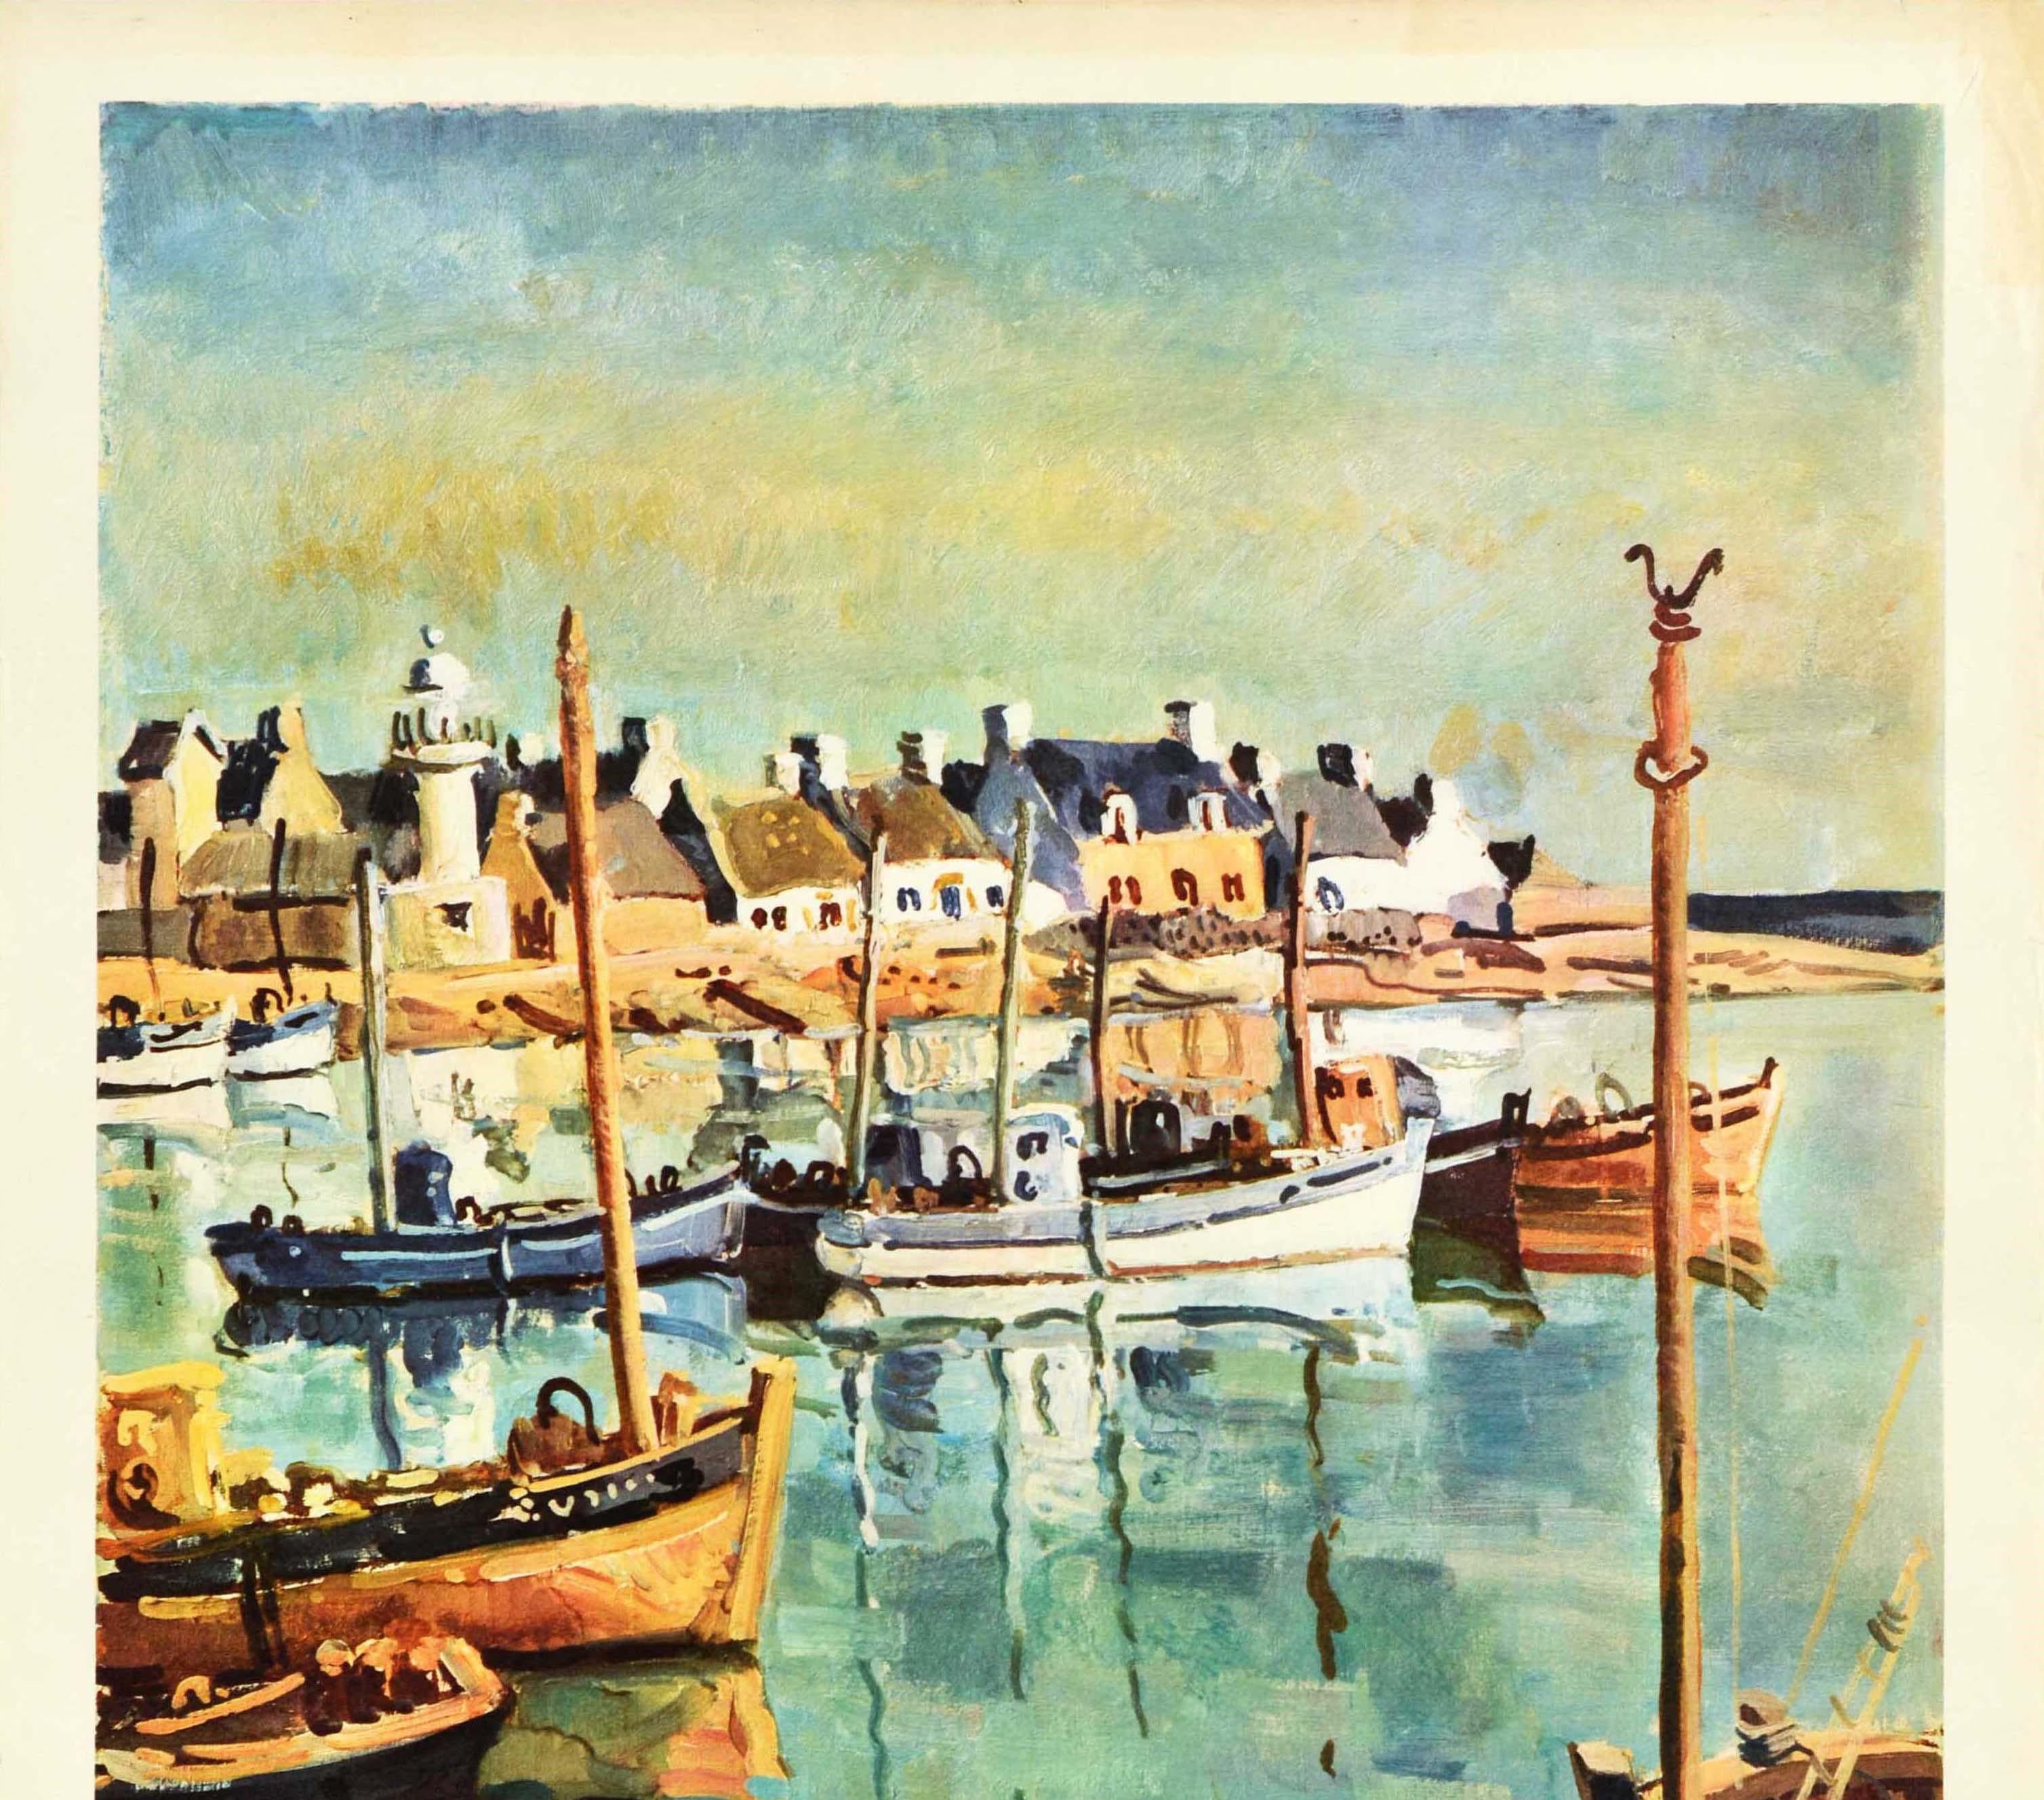 Original vintage railway travel poster for France Brittany issued by the state owned French national railways (SNCF Societe Nationale des Chemins de Fer Francais; founded 1938) featuring a colourful painting depicting a view of fishing boats moored